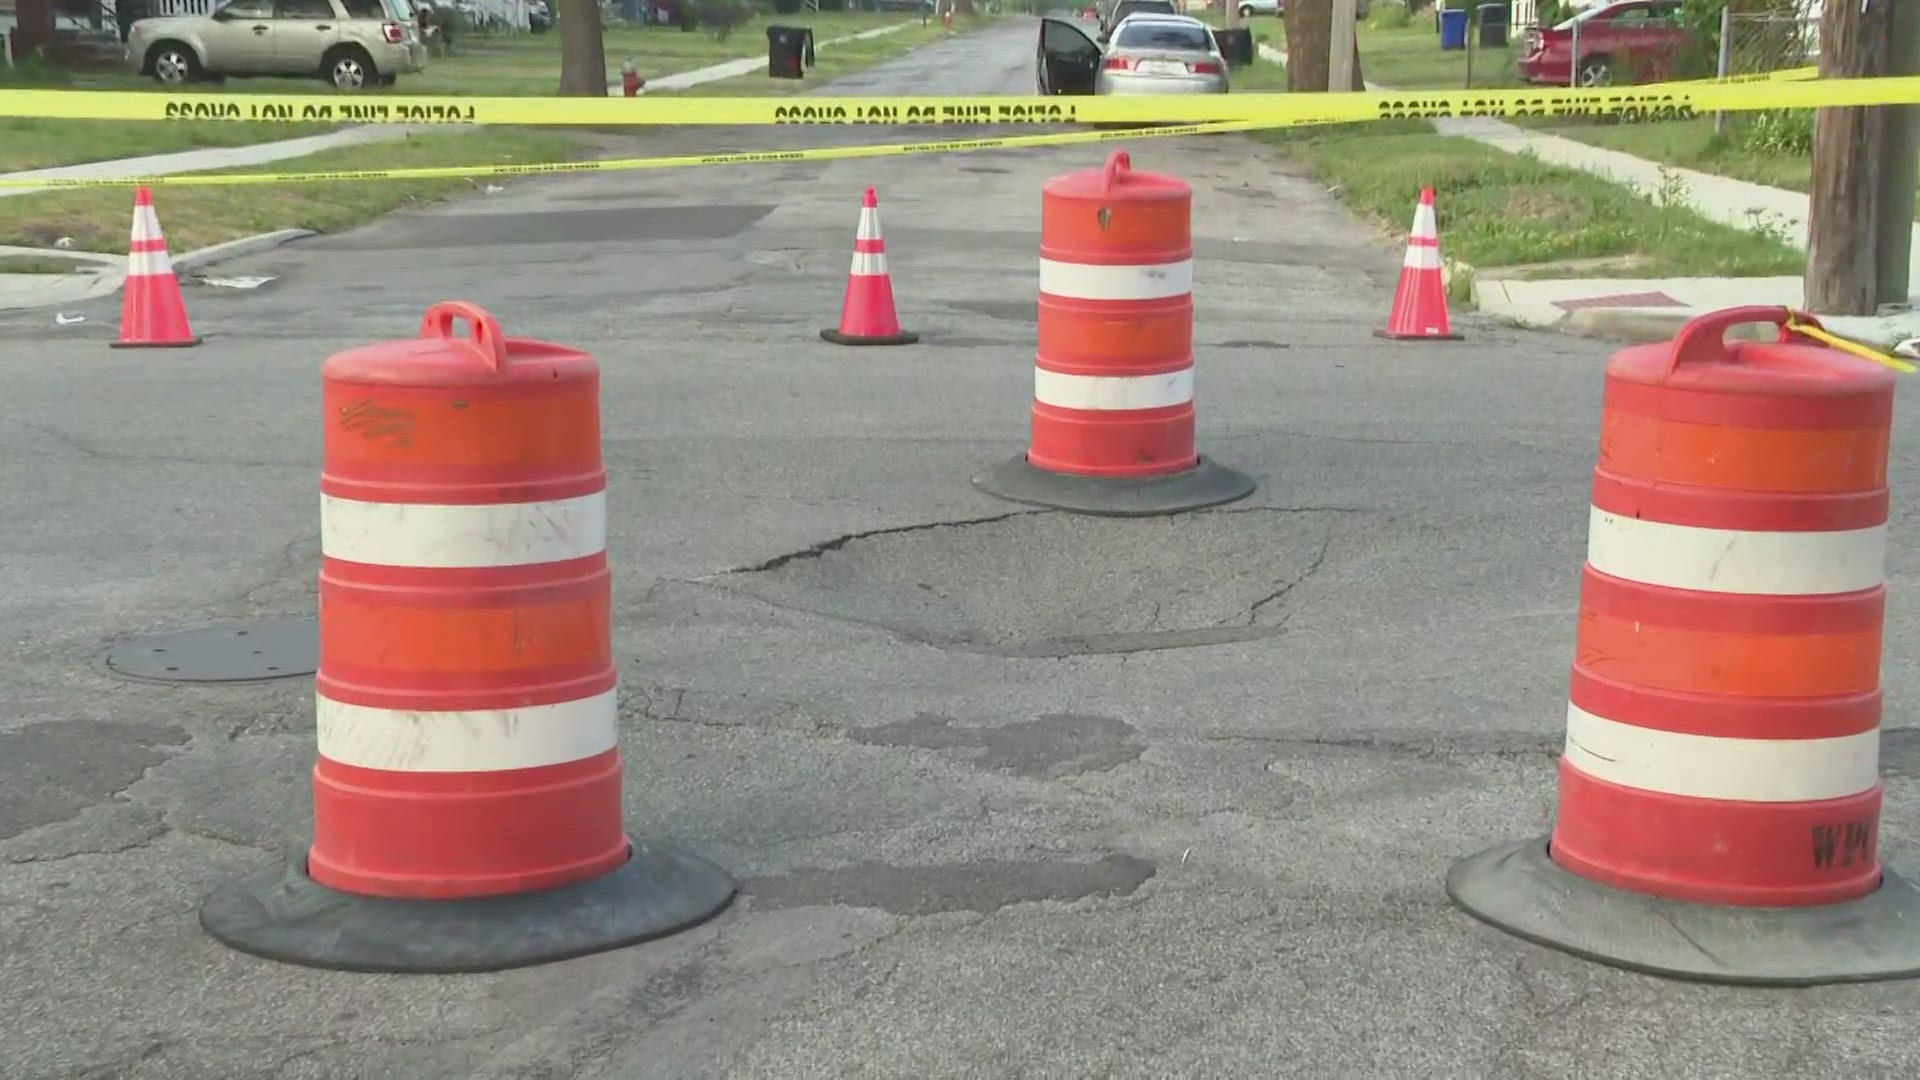 Authorities in Cleveland have closed the intersection of West 88th Street and Almira Avenue on the city’s west side as a portion of the road is collapsing.